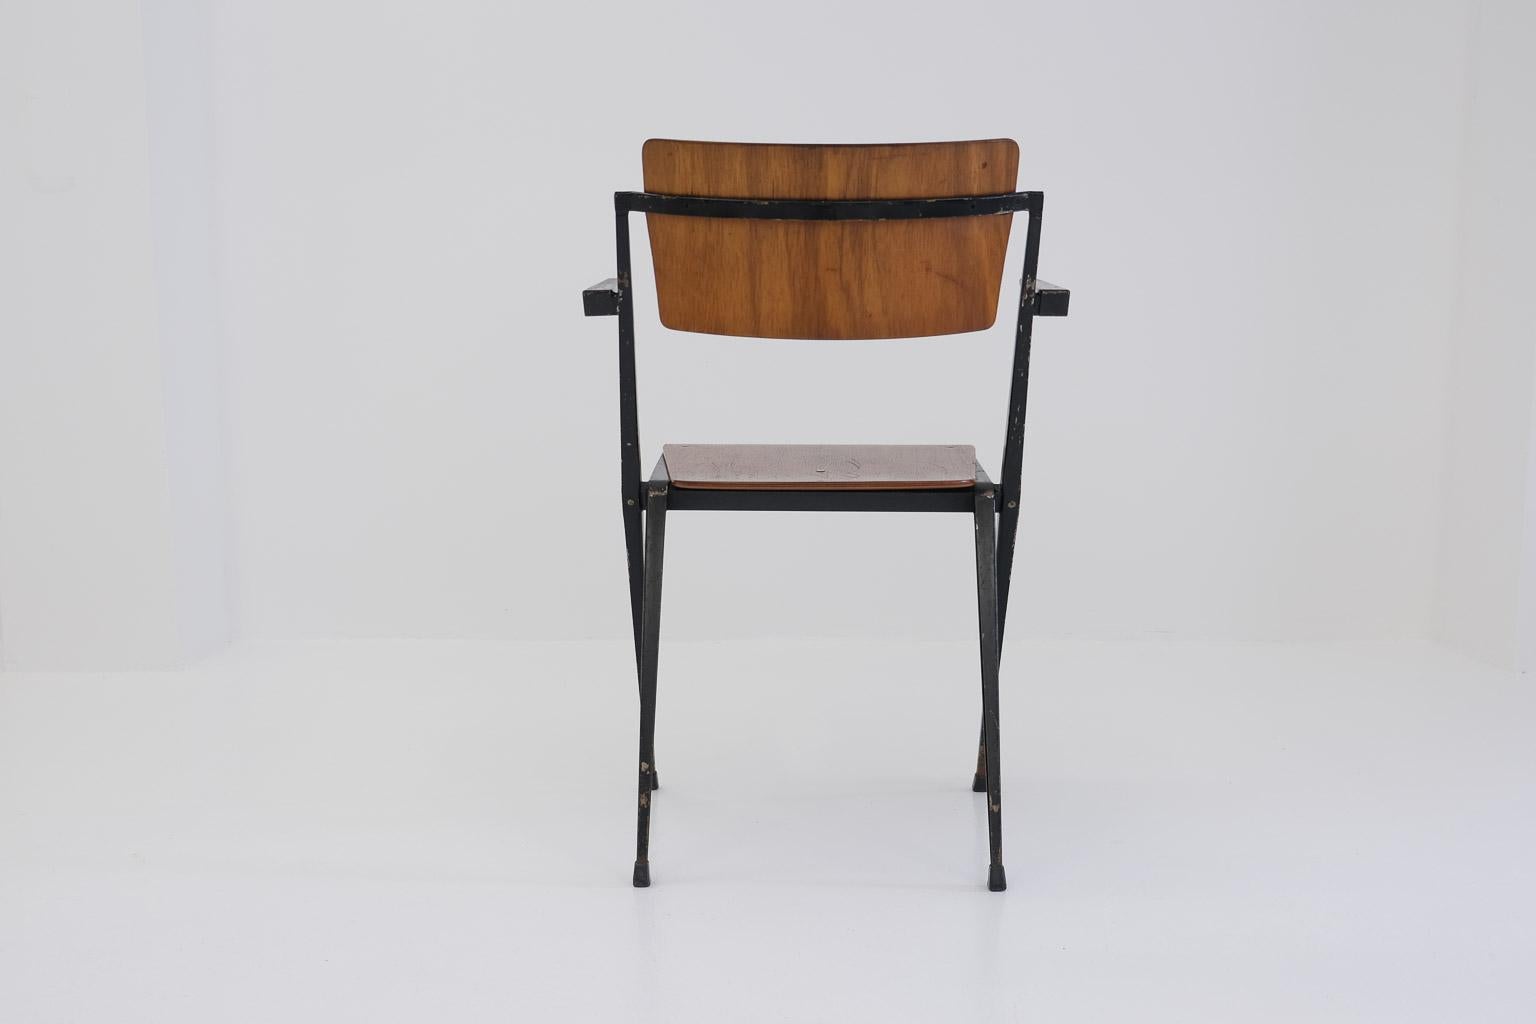 Steel Early Pyramid Arm Chair by Wim Rietveld for Ahrend de Cirkel from Feb. 1964 For Sale